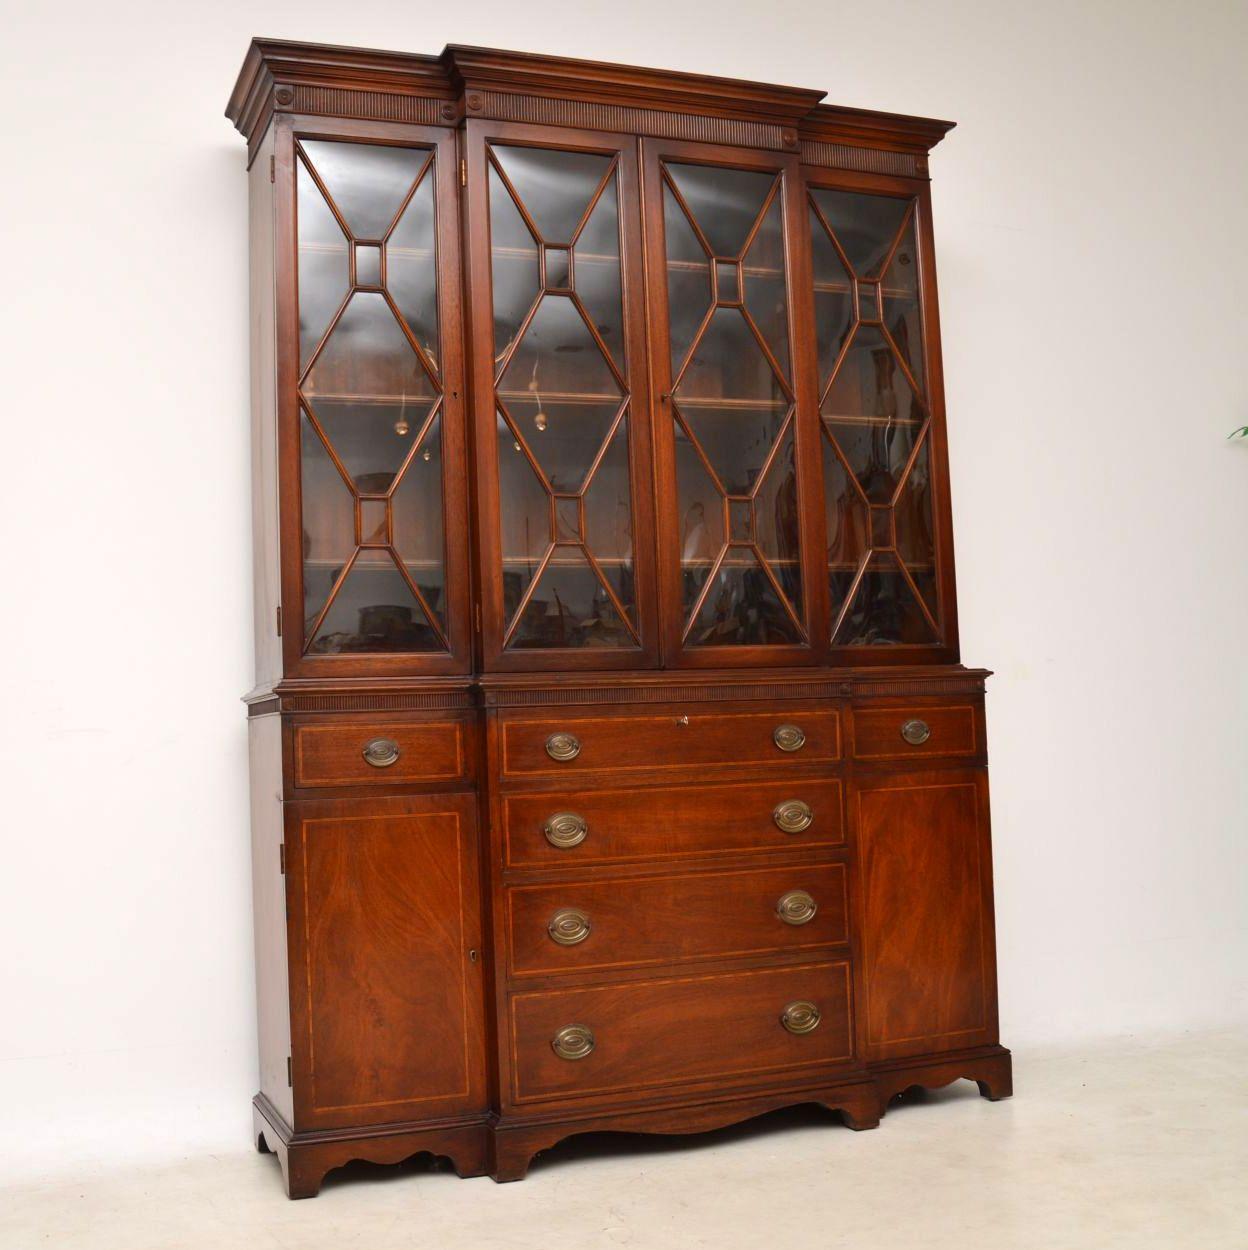 High quality antique secretaire breakfront mahogany bookcase in excellent condition and with some wonderful features. I don't know if you can see in the images, but if you enlarge you will just make out that the glass panels are all slightly curved